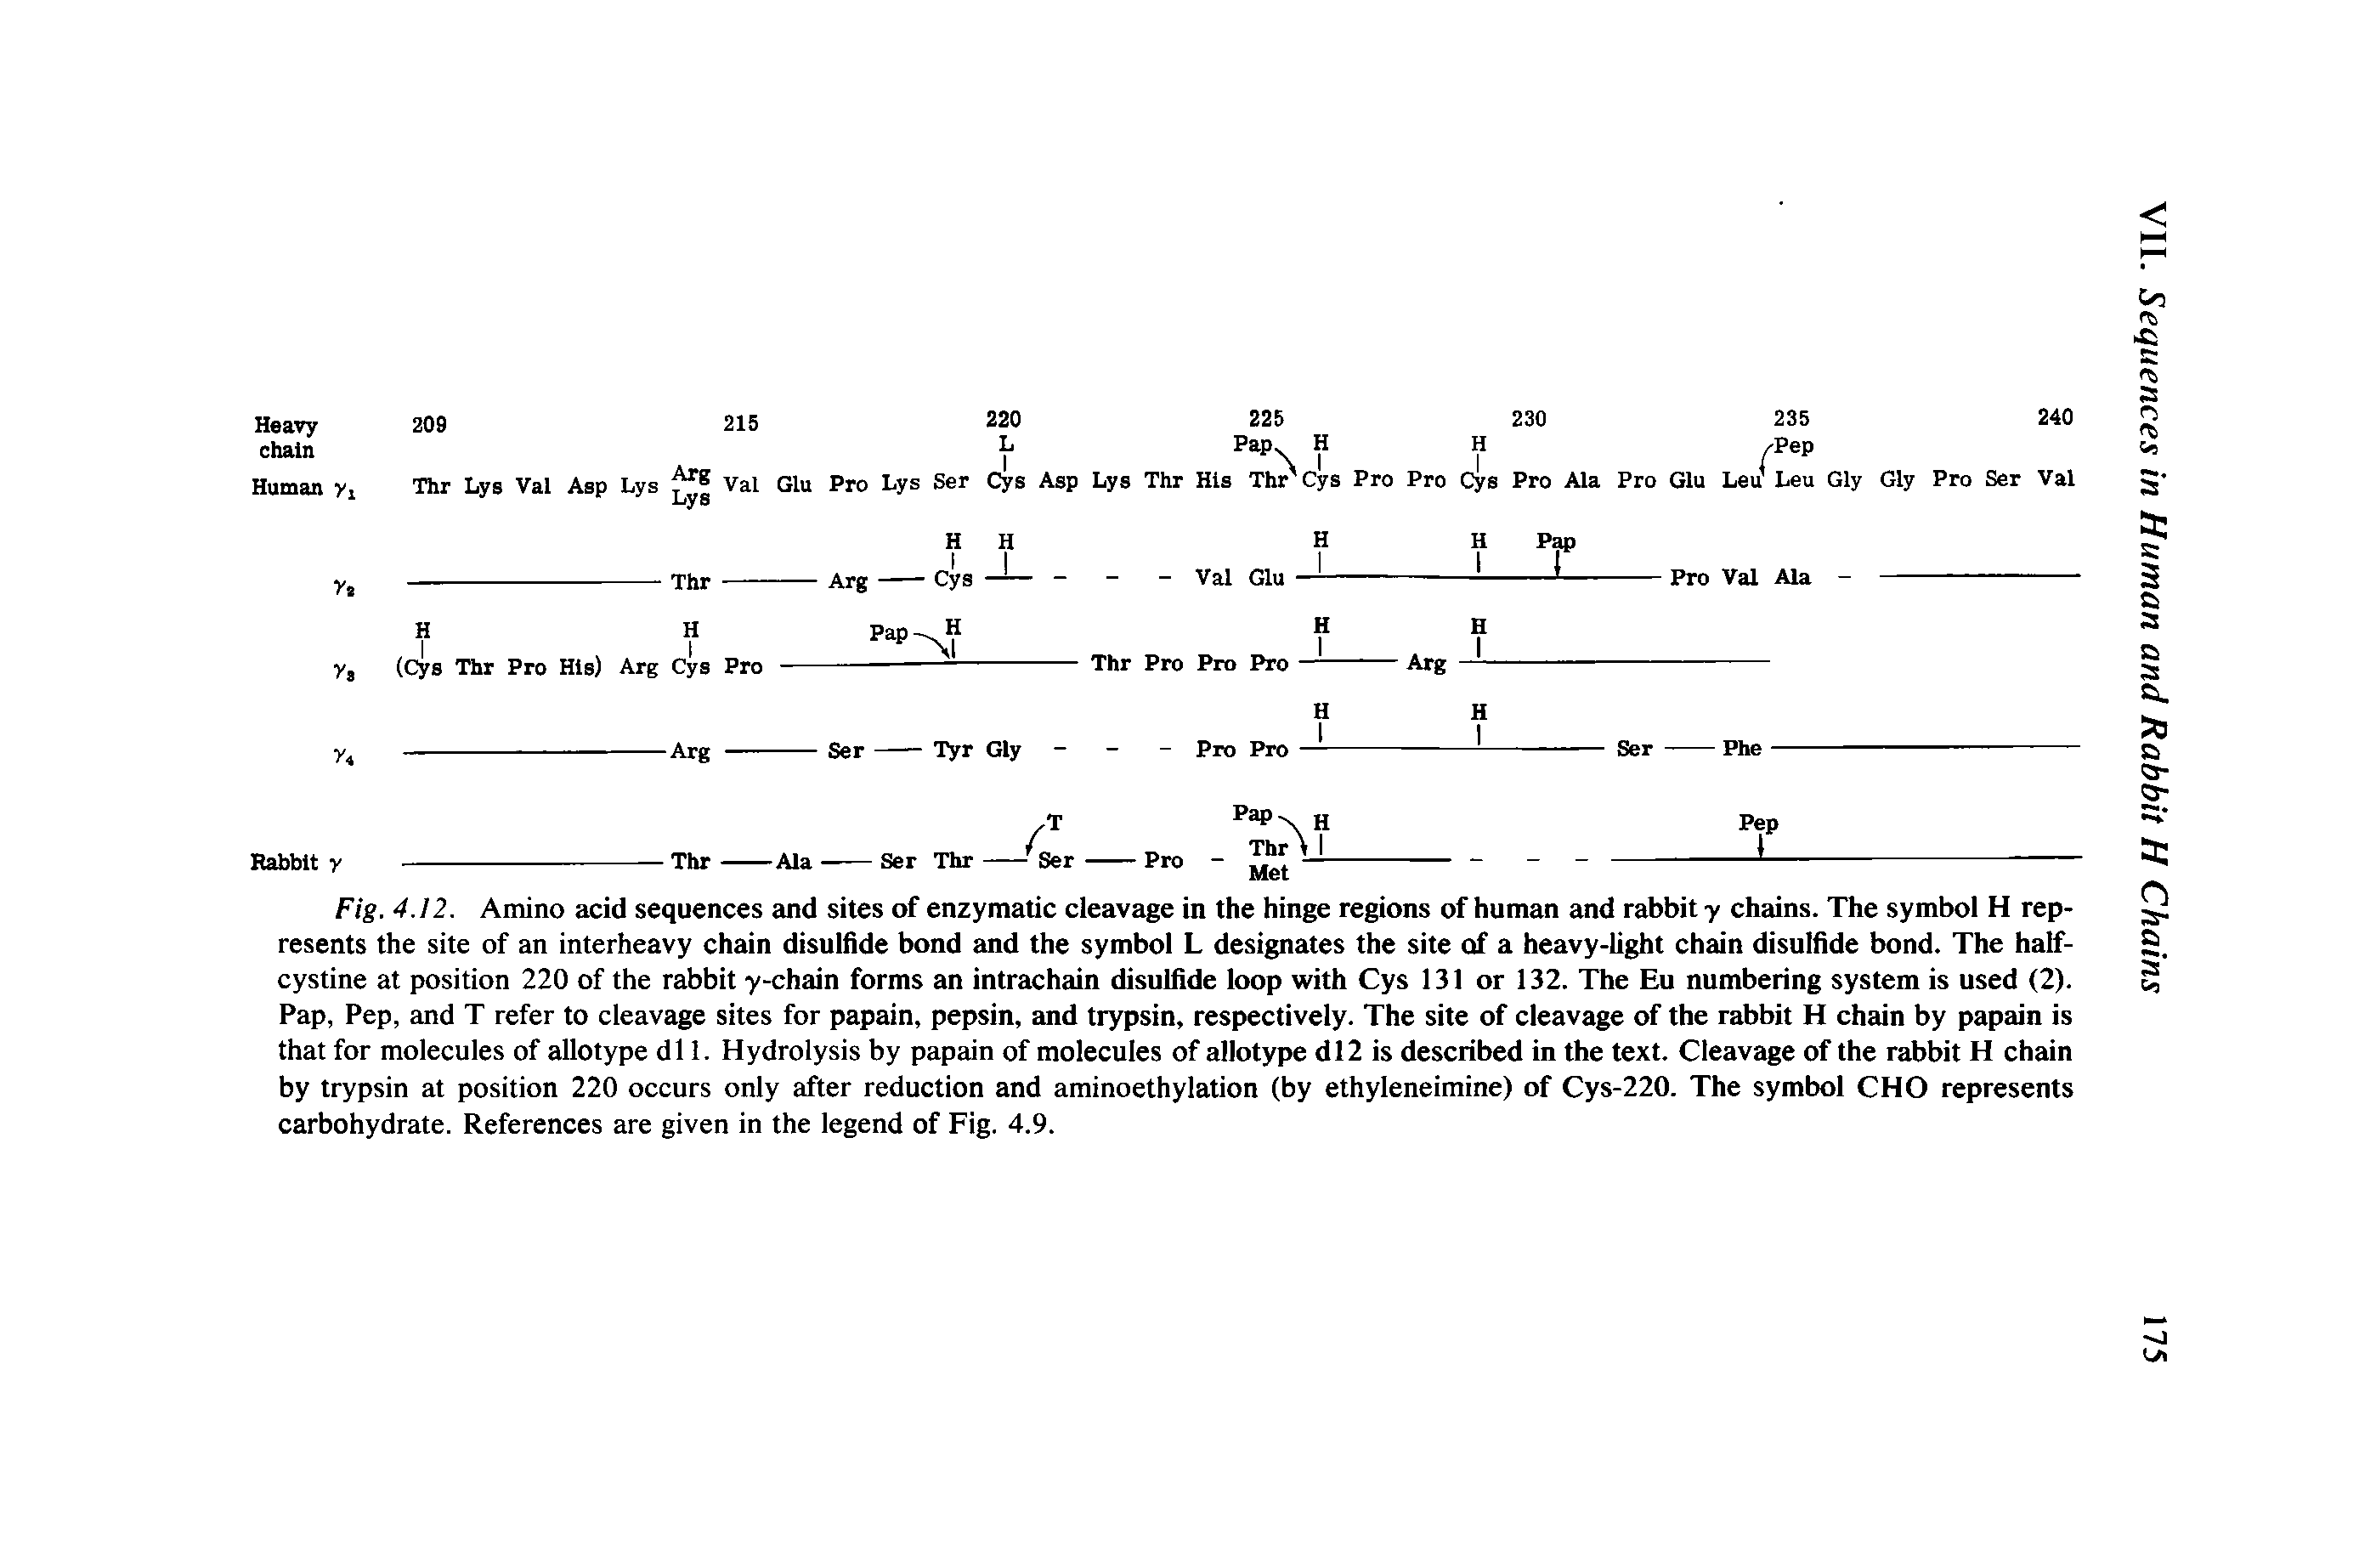 Fig. 4.12. Amino acid sequences and sites of enzymatic cleavage in the hinge regions of human and rabbit-y chains. The symbol H represents the site of an interheavy chain disulfide bond and the symbol L designates the site of a heavy-light chain disulfide bond. The halfcystine at position 220 of the rabbit y-chain forms an intrachain disulfide loop with Cys 131 or 132. The Eu numbering system is used (2). Pap, Pep, and T refer to cleavage sites for papain, pepsin, and trypsin, respectively. The site of cleavage of the rabbit H chain by papain is that for molecules of allotype dll. Hydrolysis by papain of molecules of allotype dl2 is described in the text. Cleavage of the rabbit H chain by trypsin at position 220 occurs only after reduction and aminoethylation (by ethyleneimine) of Cys-220. The symbol CHO represents carbohydrate. References are given in the legend of Fig. 4.9.